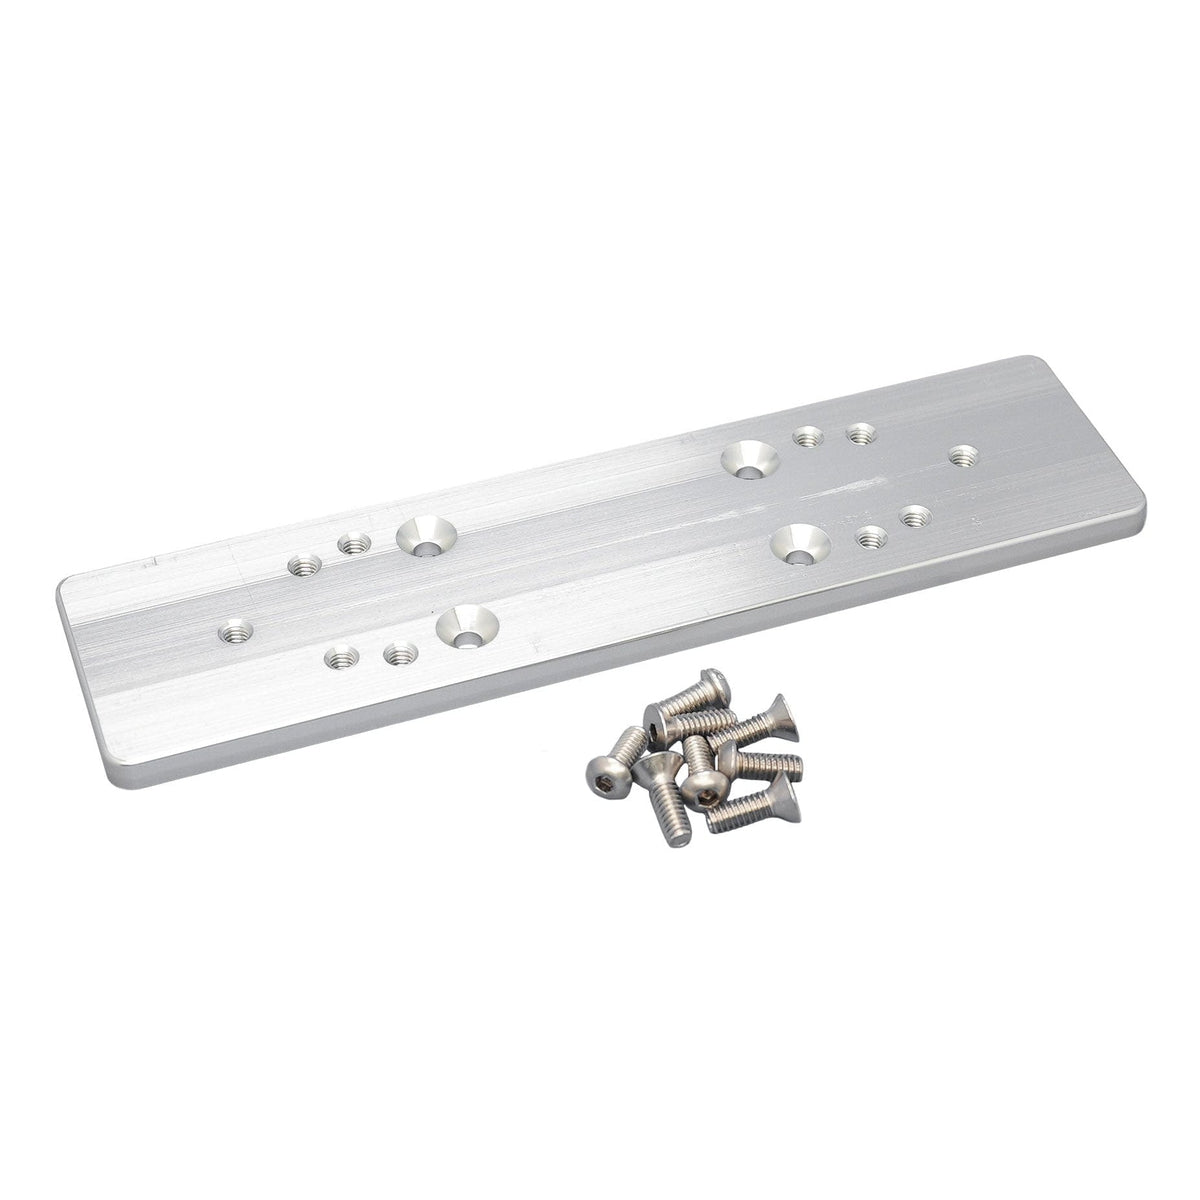 Traxstech Qualifies for Free Shipping Traxstech Electronics Mount Long Top Plate for 10" & 12" Devices #ECTAP-110